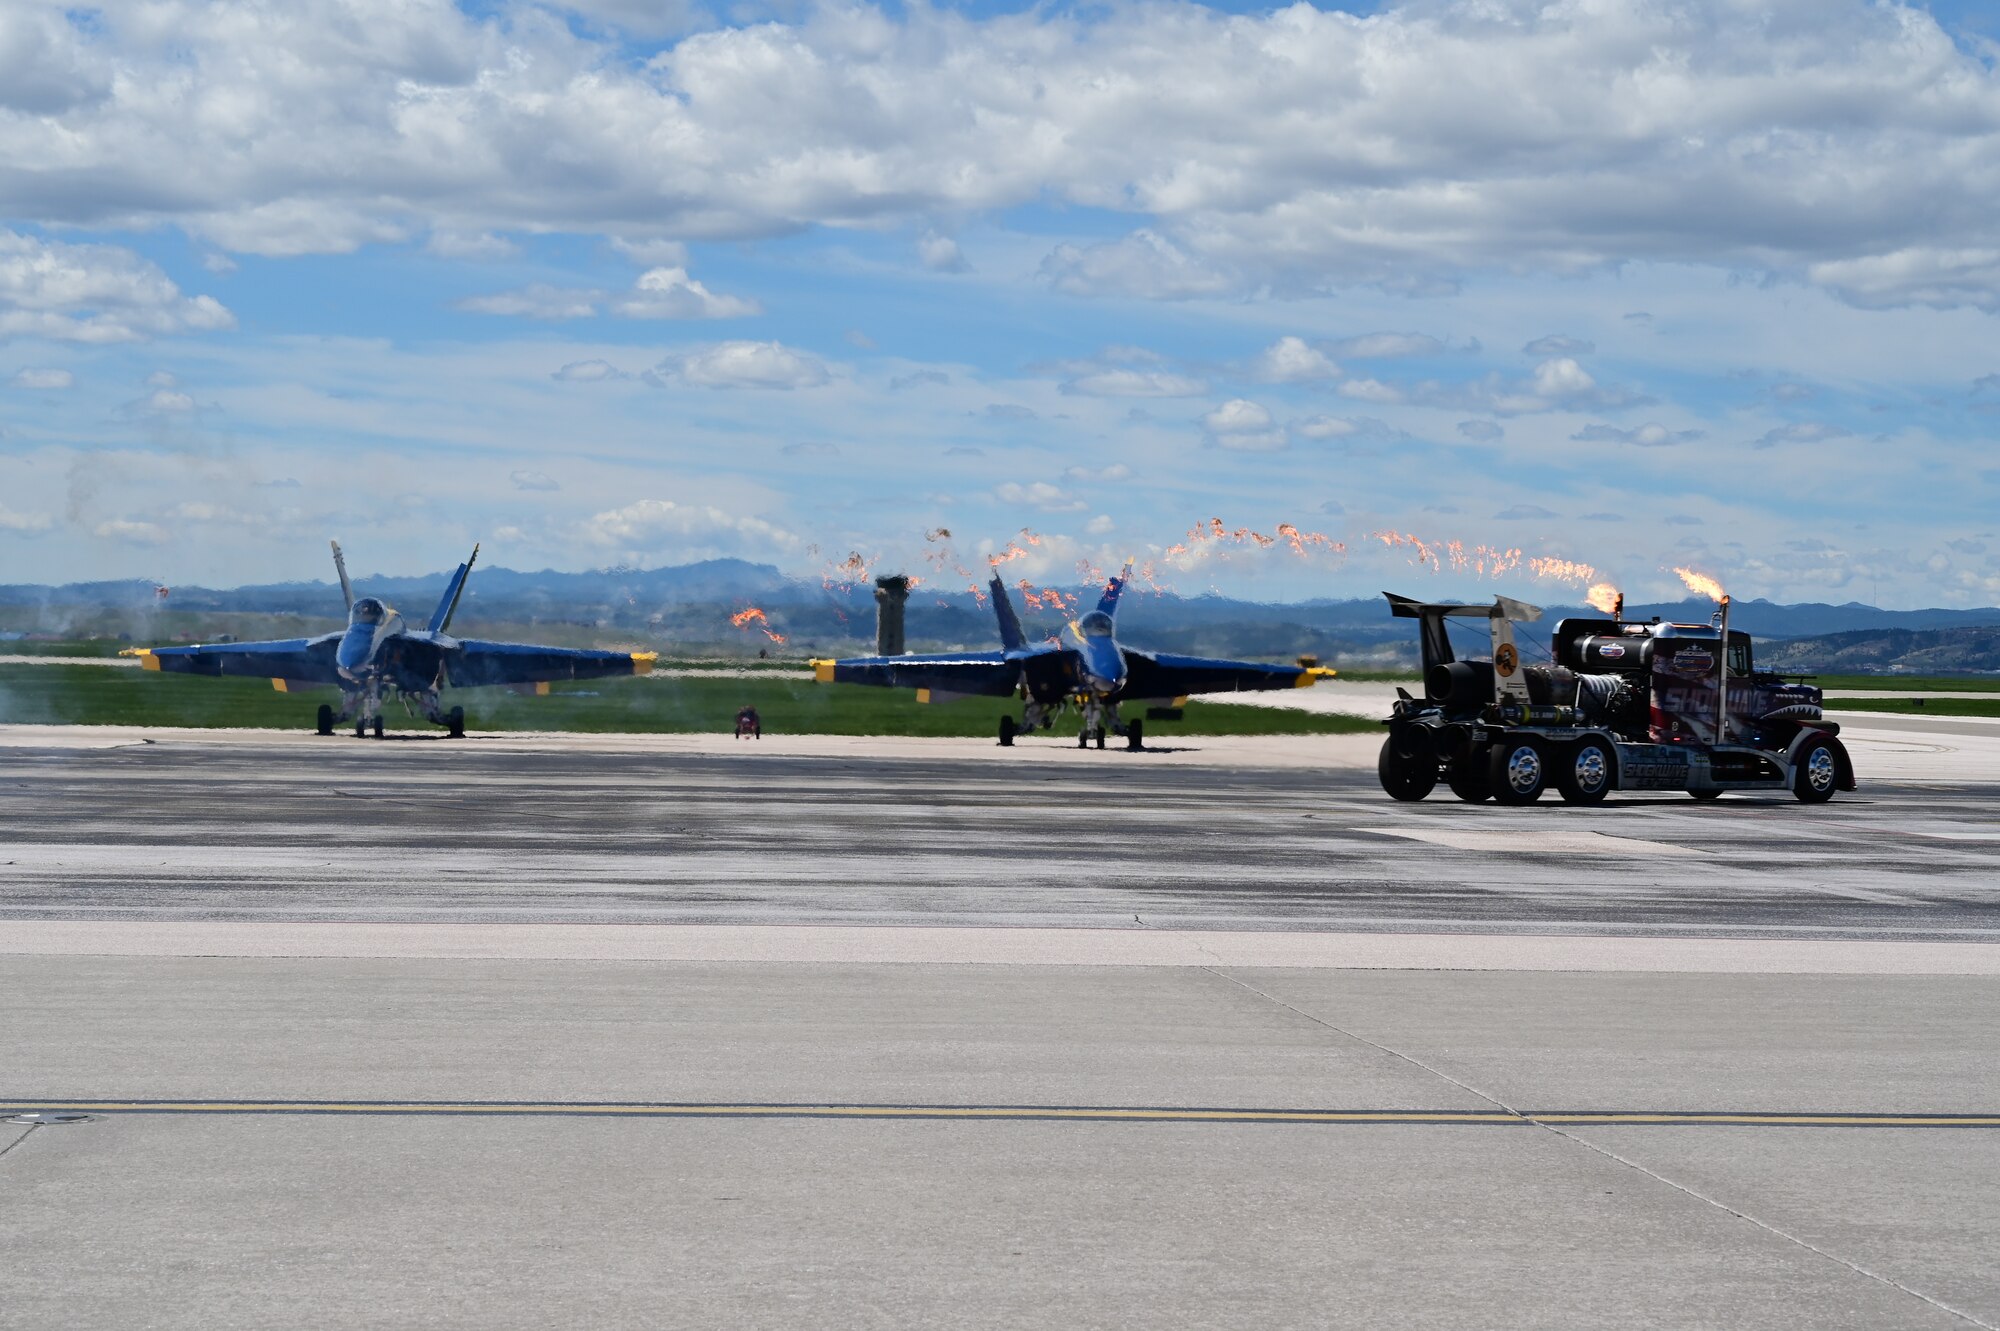 The Shockwave Jet Truck drives past two U.S. Navy Flight Demonstration Squadron Blue Angels at the 2022 Ellsworth Air and Space Show on Ellsworth Air Force Base, S.D., May 15, 2022. The Shockwave is a custom-built race truck featuring three jet engines with 36,000 horsepower. (U.S. Air Force photo by Staff Sgt. Hannah Malone)